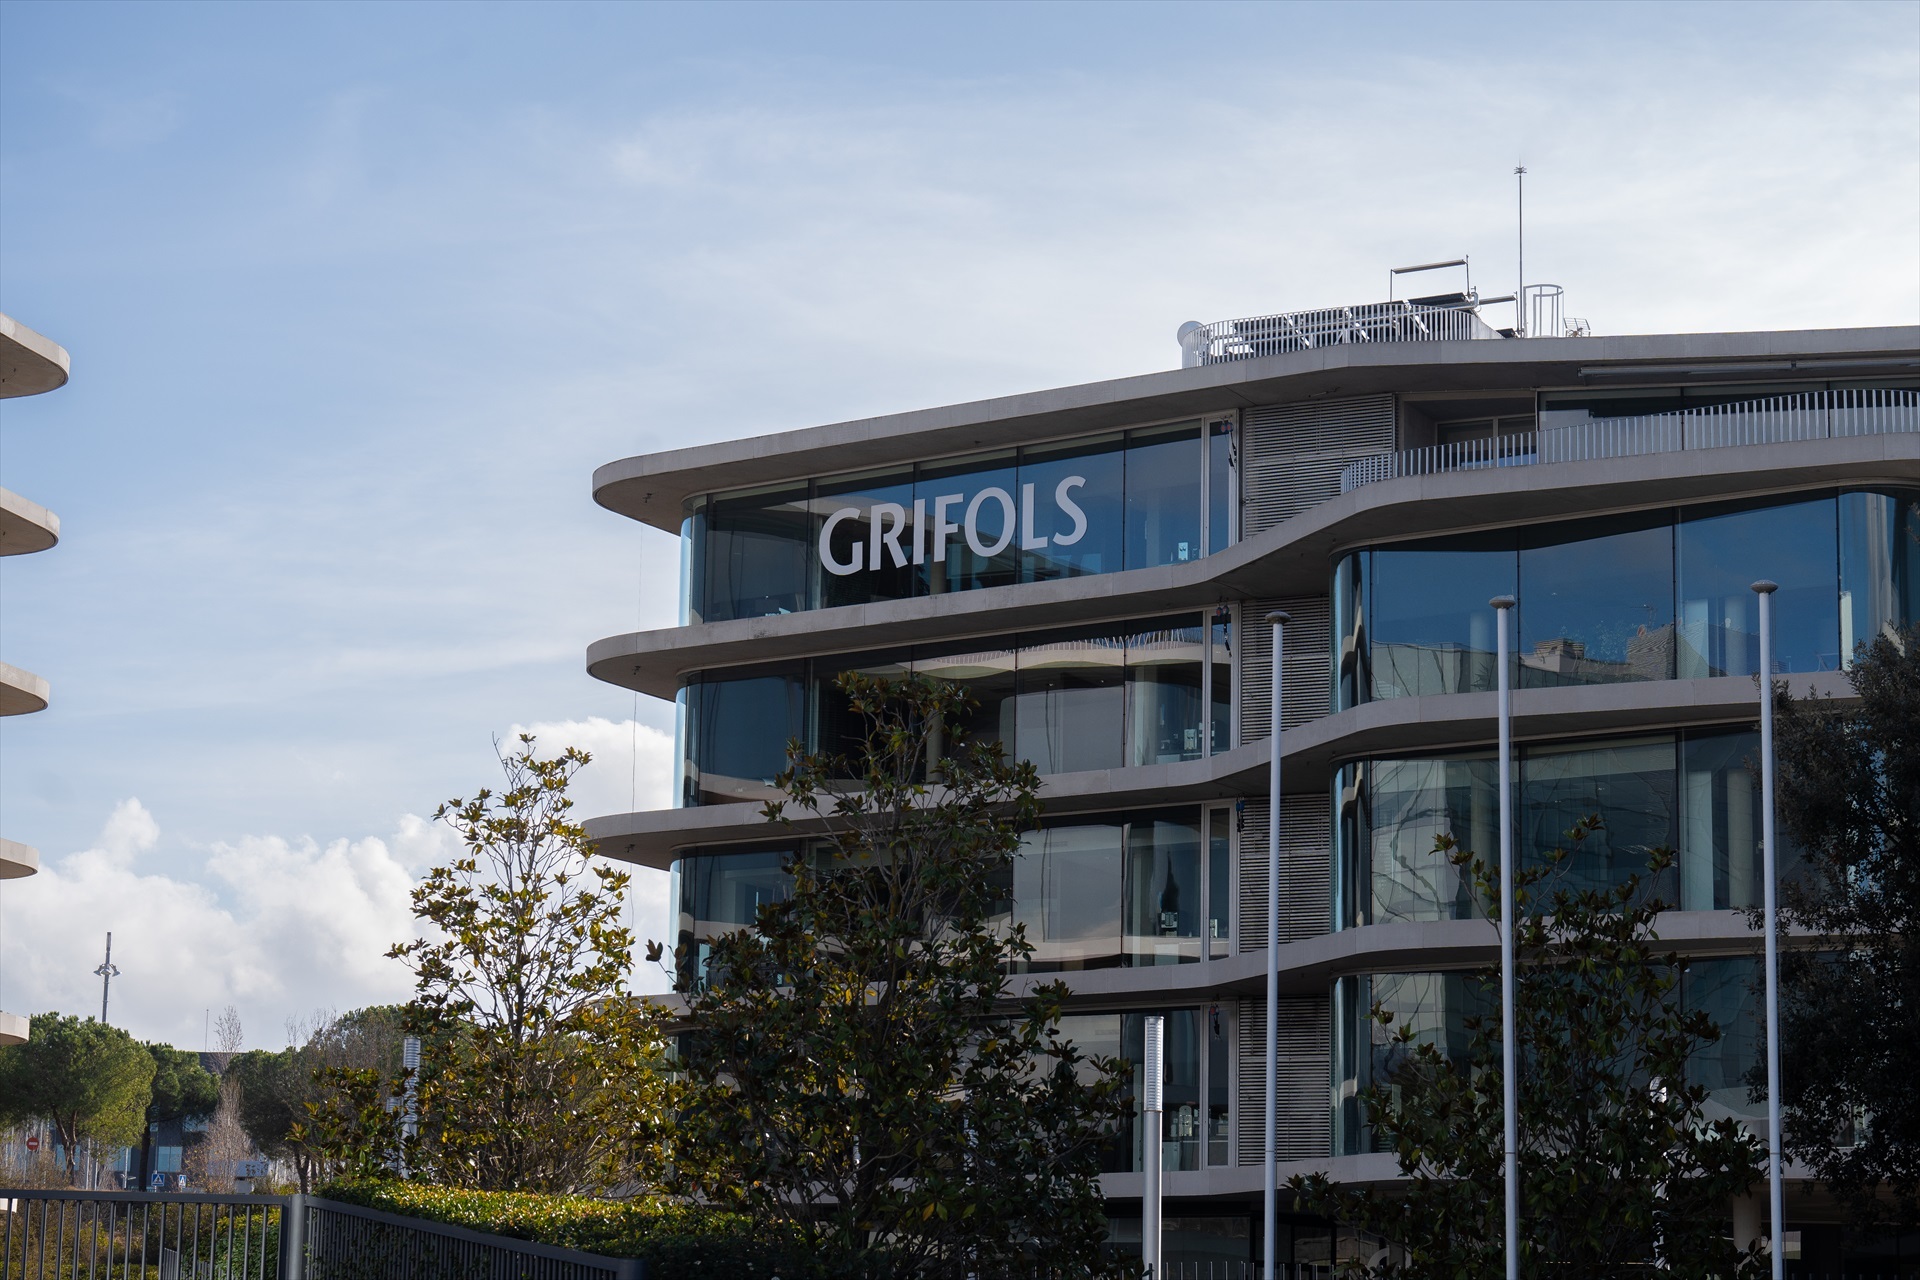 Catalan pharma firm Grifols loses 26% of share value after accounting manipulation claims